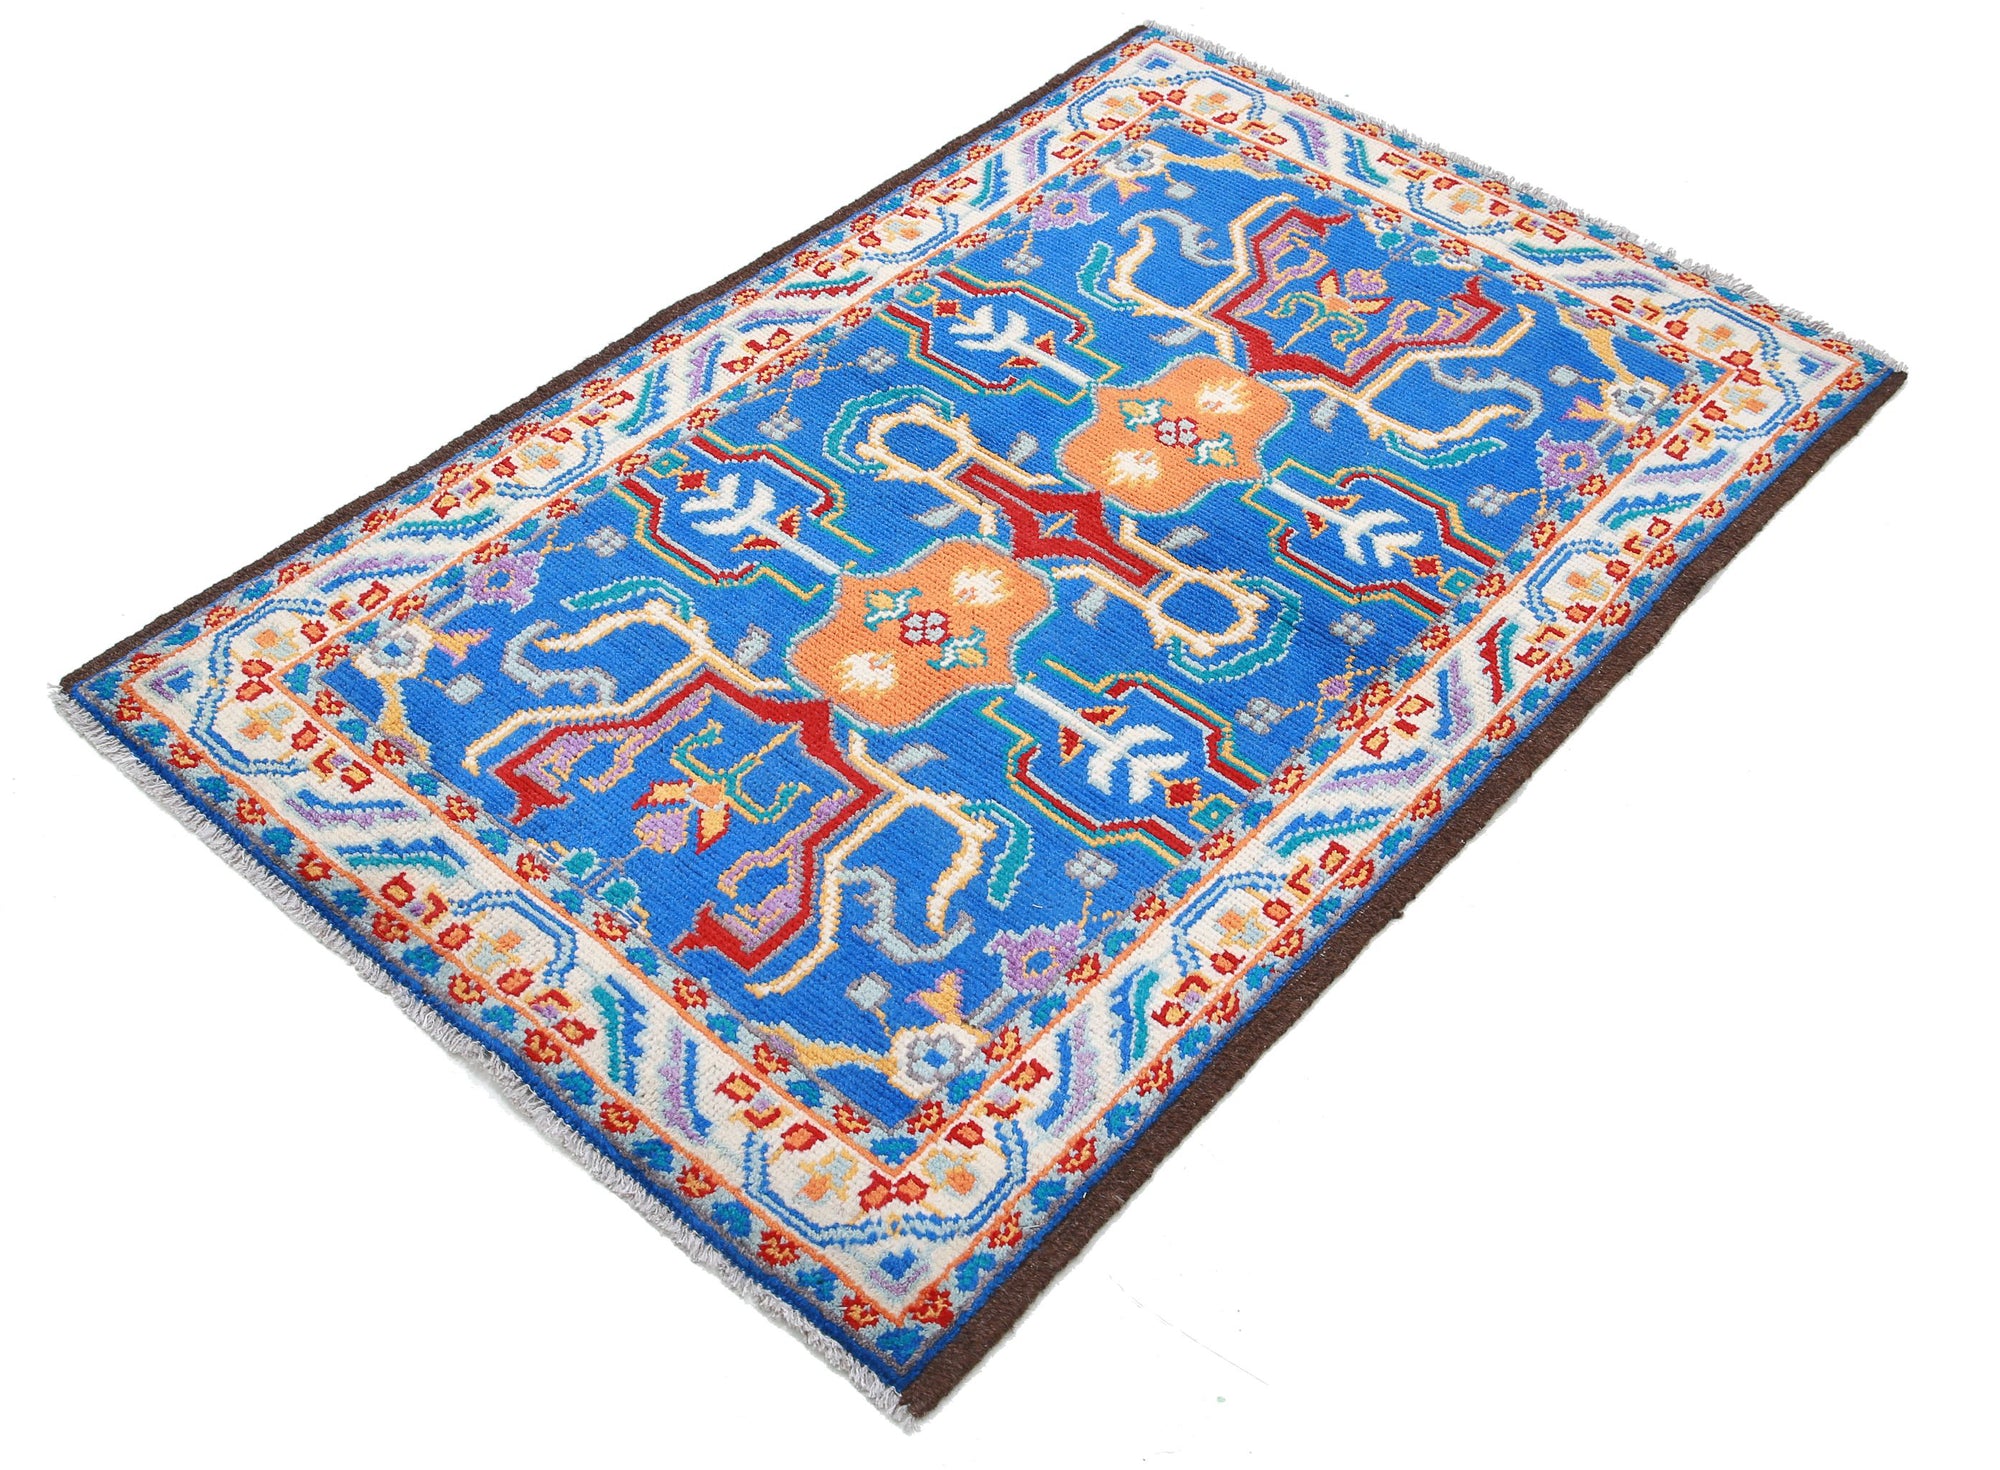 Revival-hand-knotted-qarghani-wool-rug-5014201-2.jpg